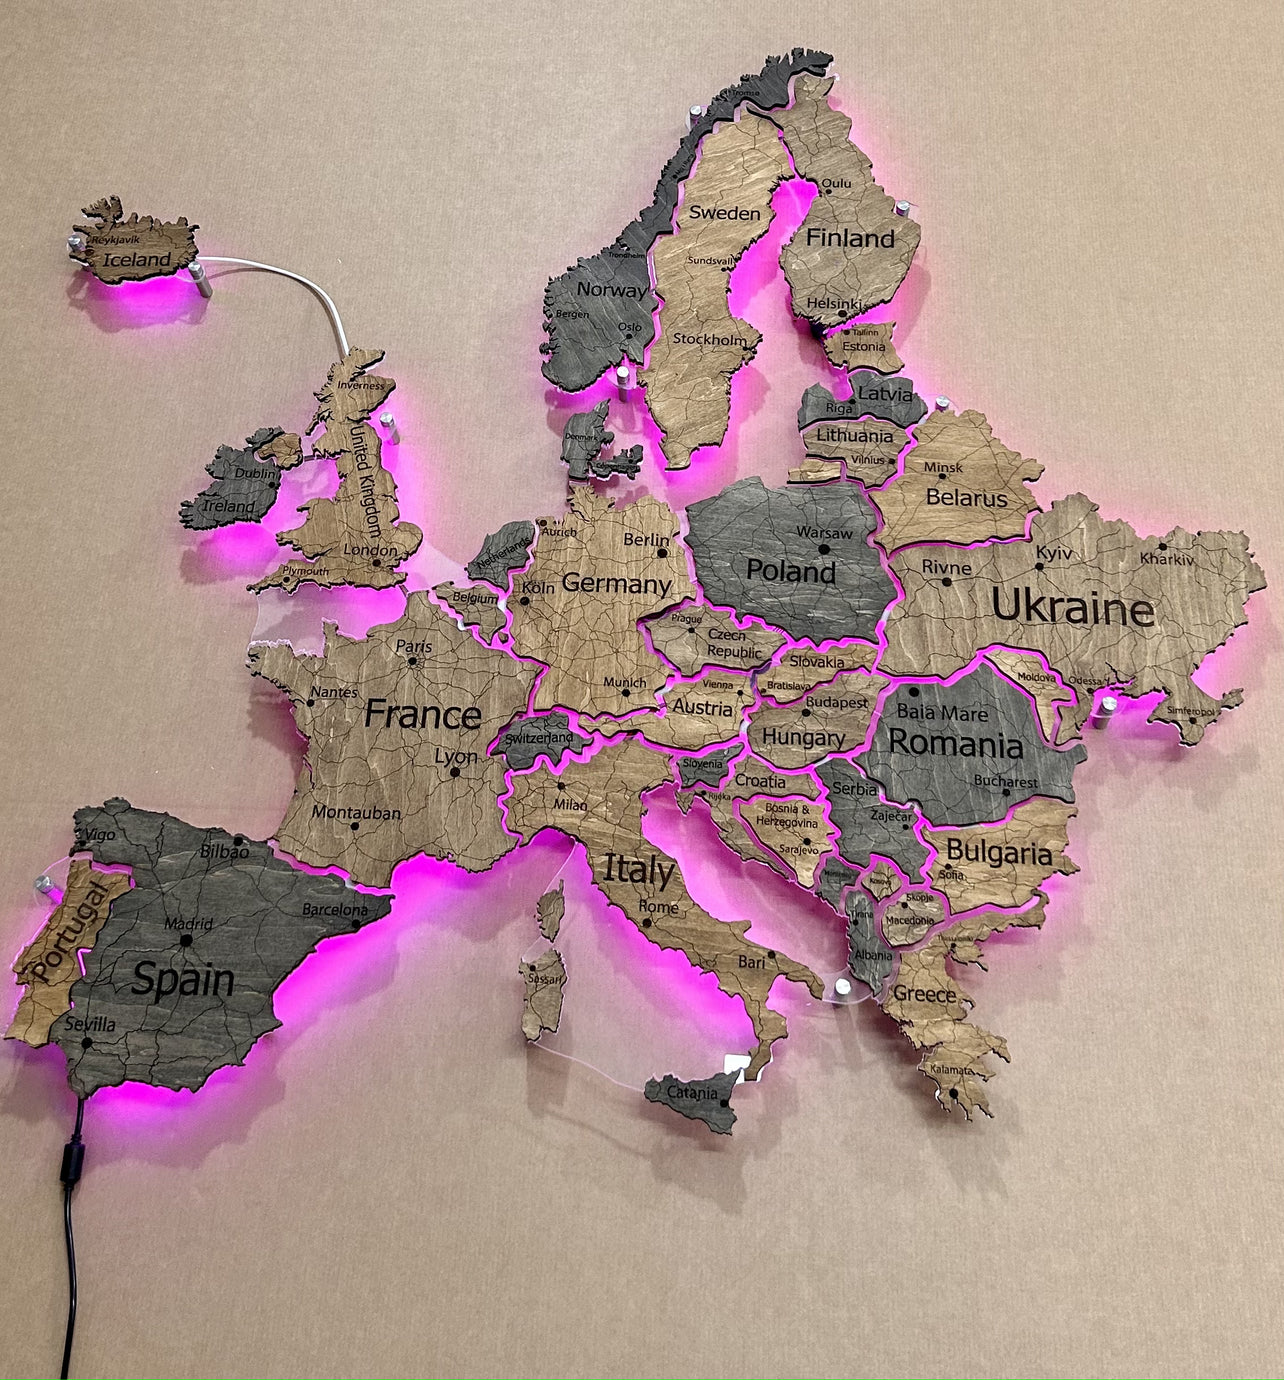 Europe LED RGB map on acrylic glass with backlighting between countries color Dark Tree